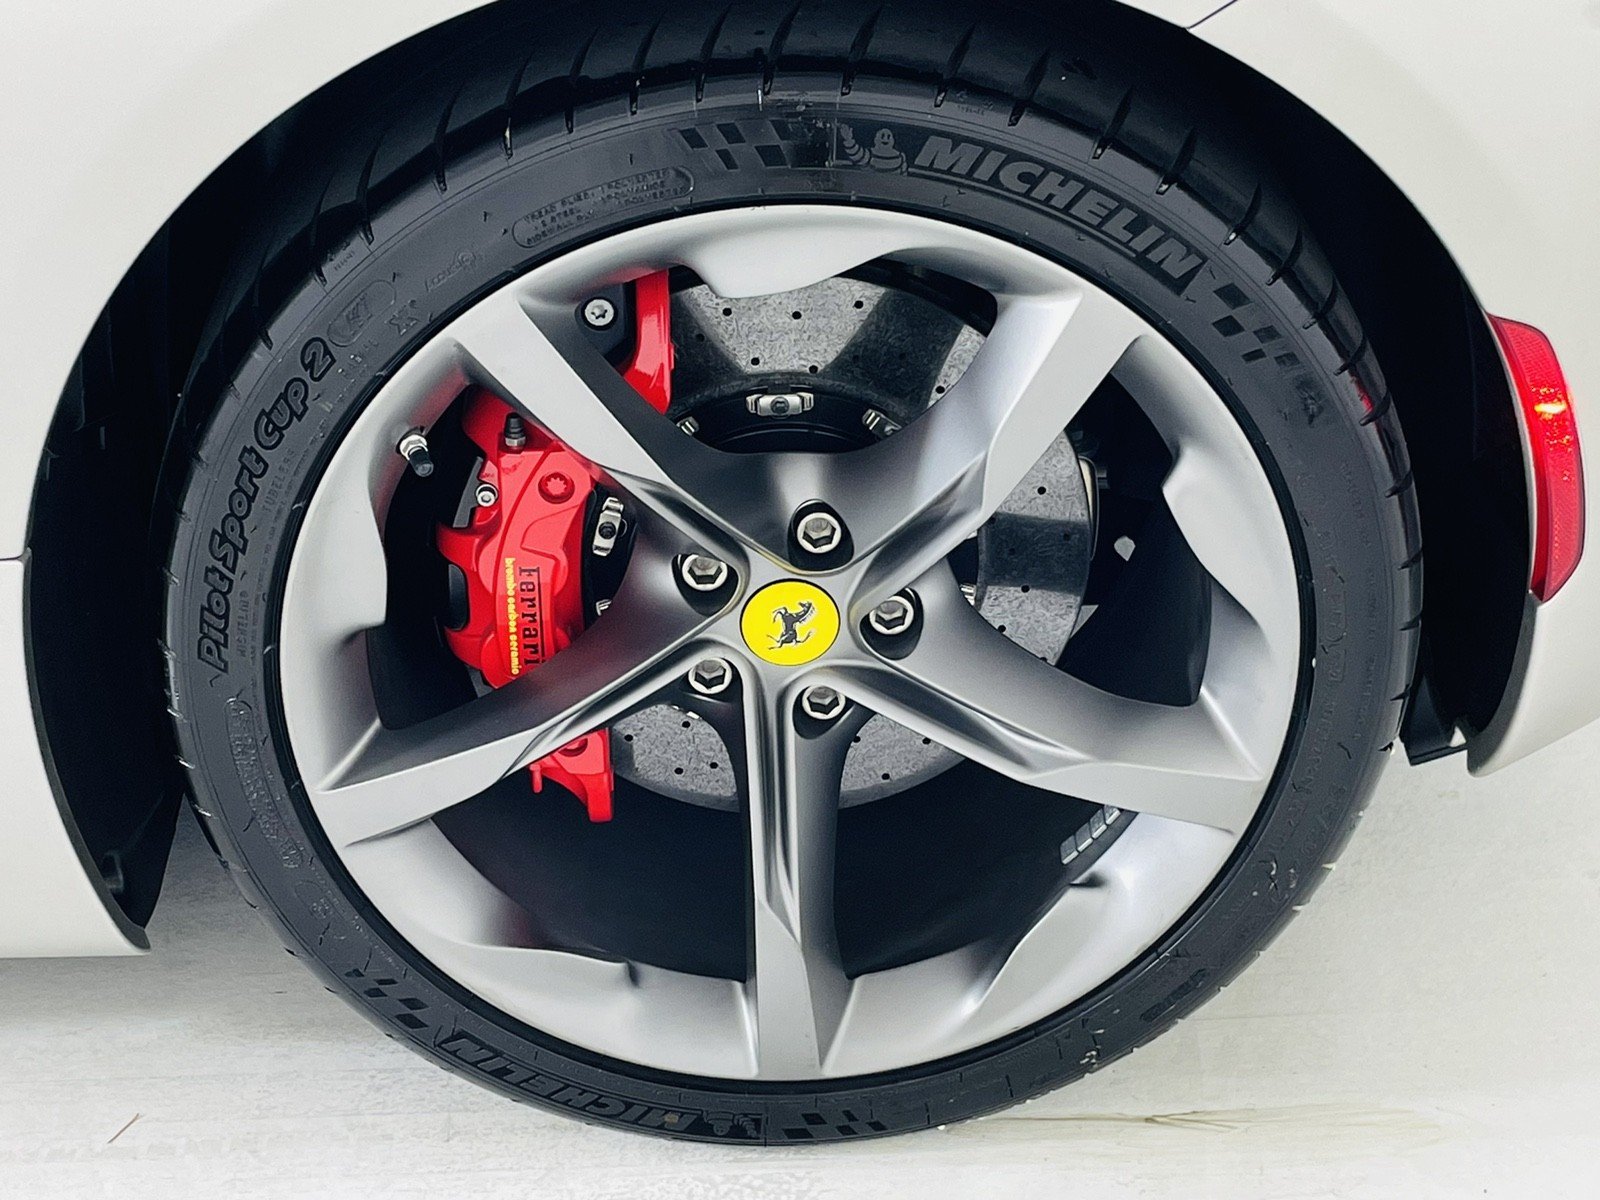 USED 2021 FERRARI SF90 STRADALE COUPE W A 650K MSRP FOR SALE (13)